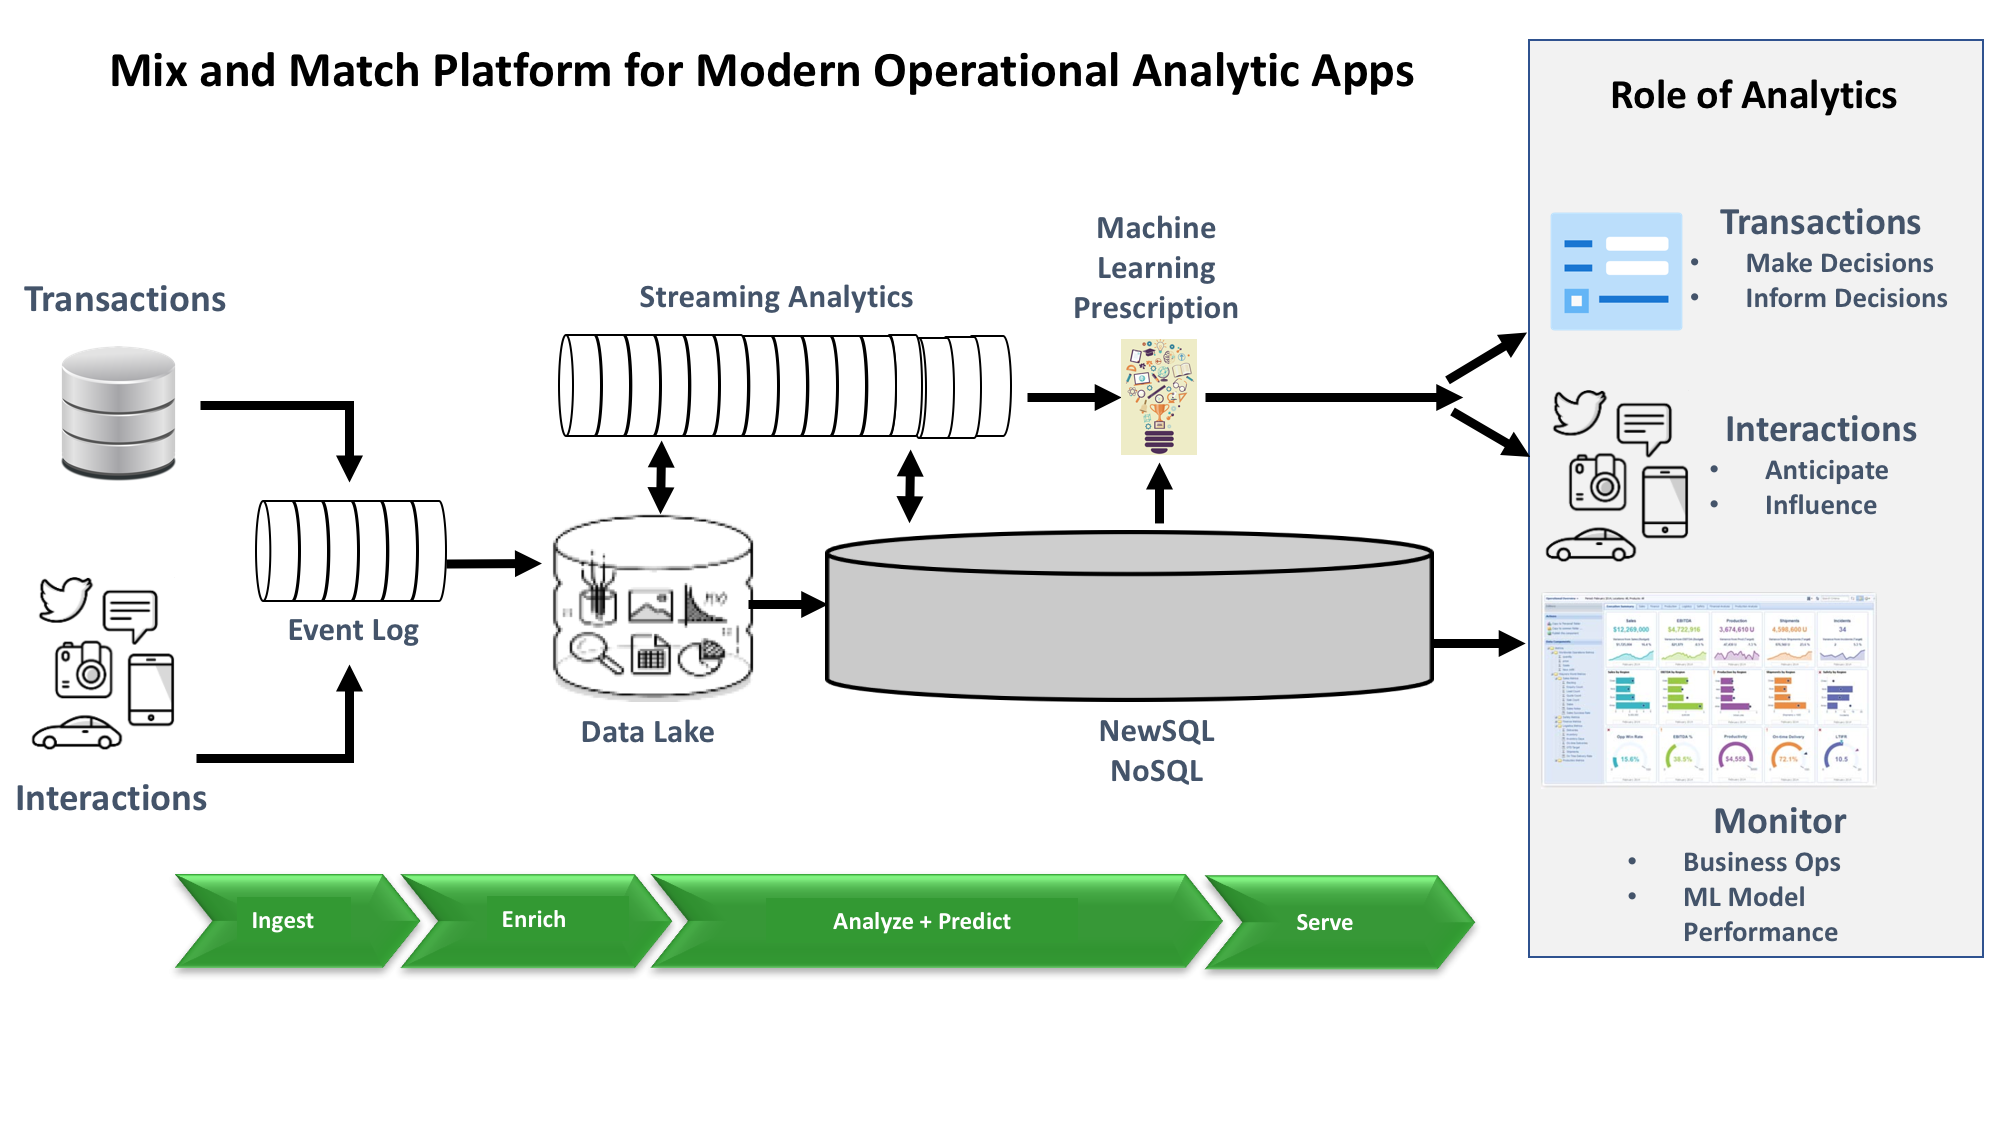 Figure 3: A best-of-breed approach to building modern operational analytics applications requires integrating mix-and-match components. This approach also makes it easier to choose specialized functionality that closely matches a project's needs.